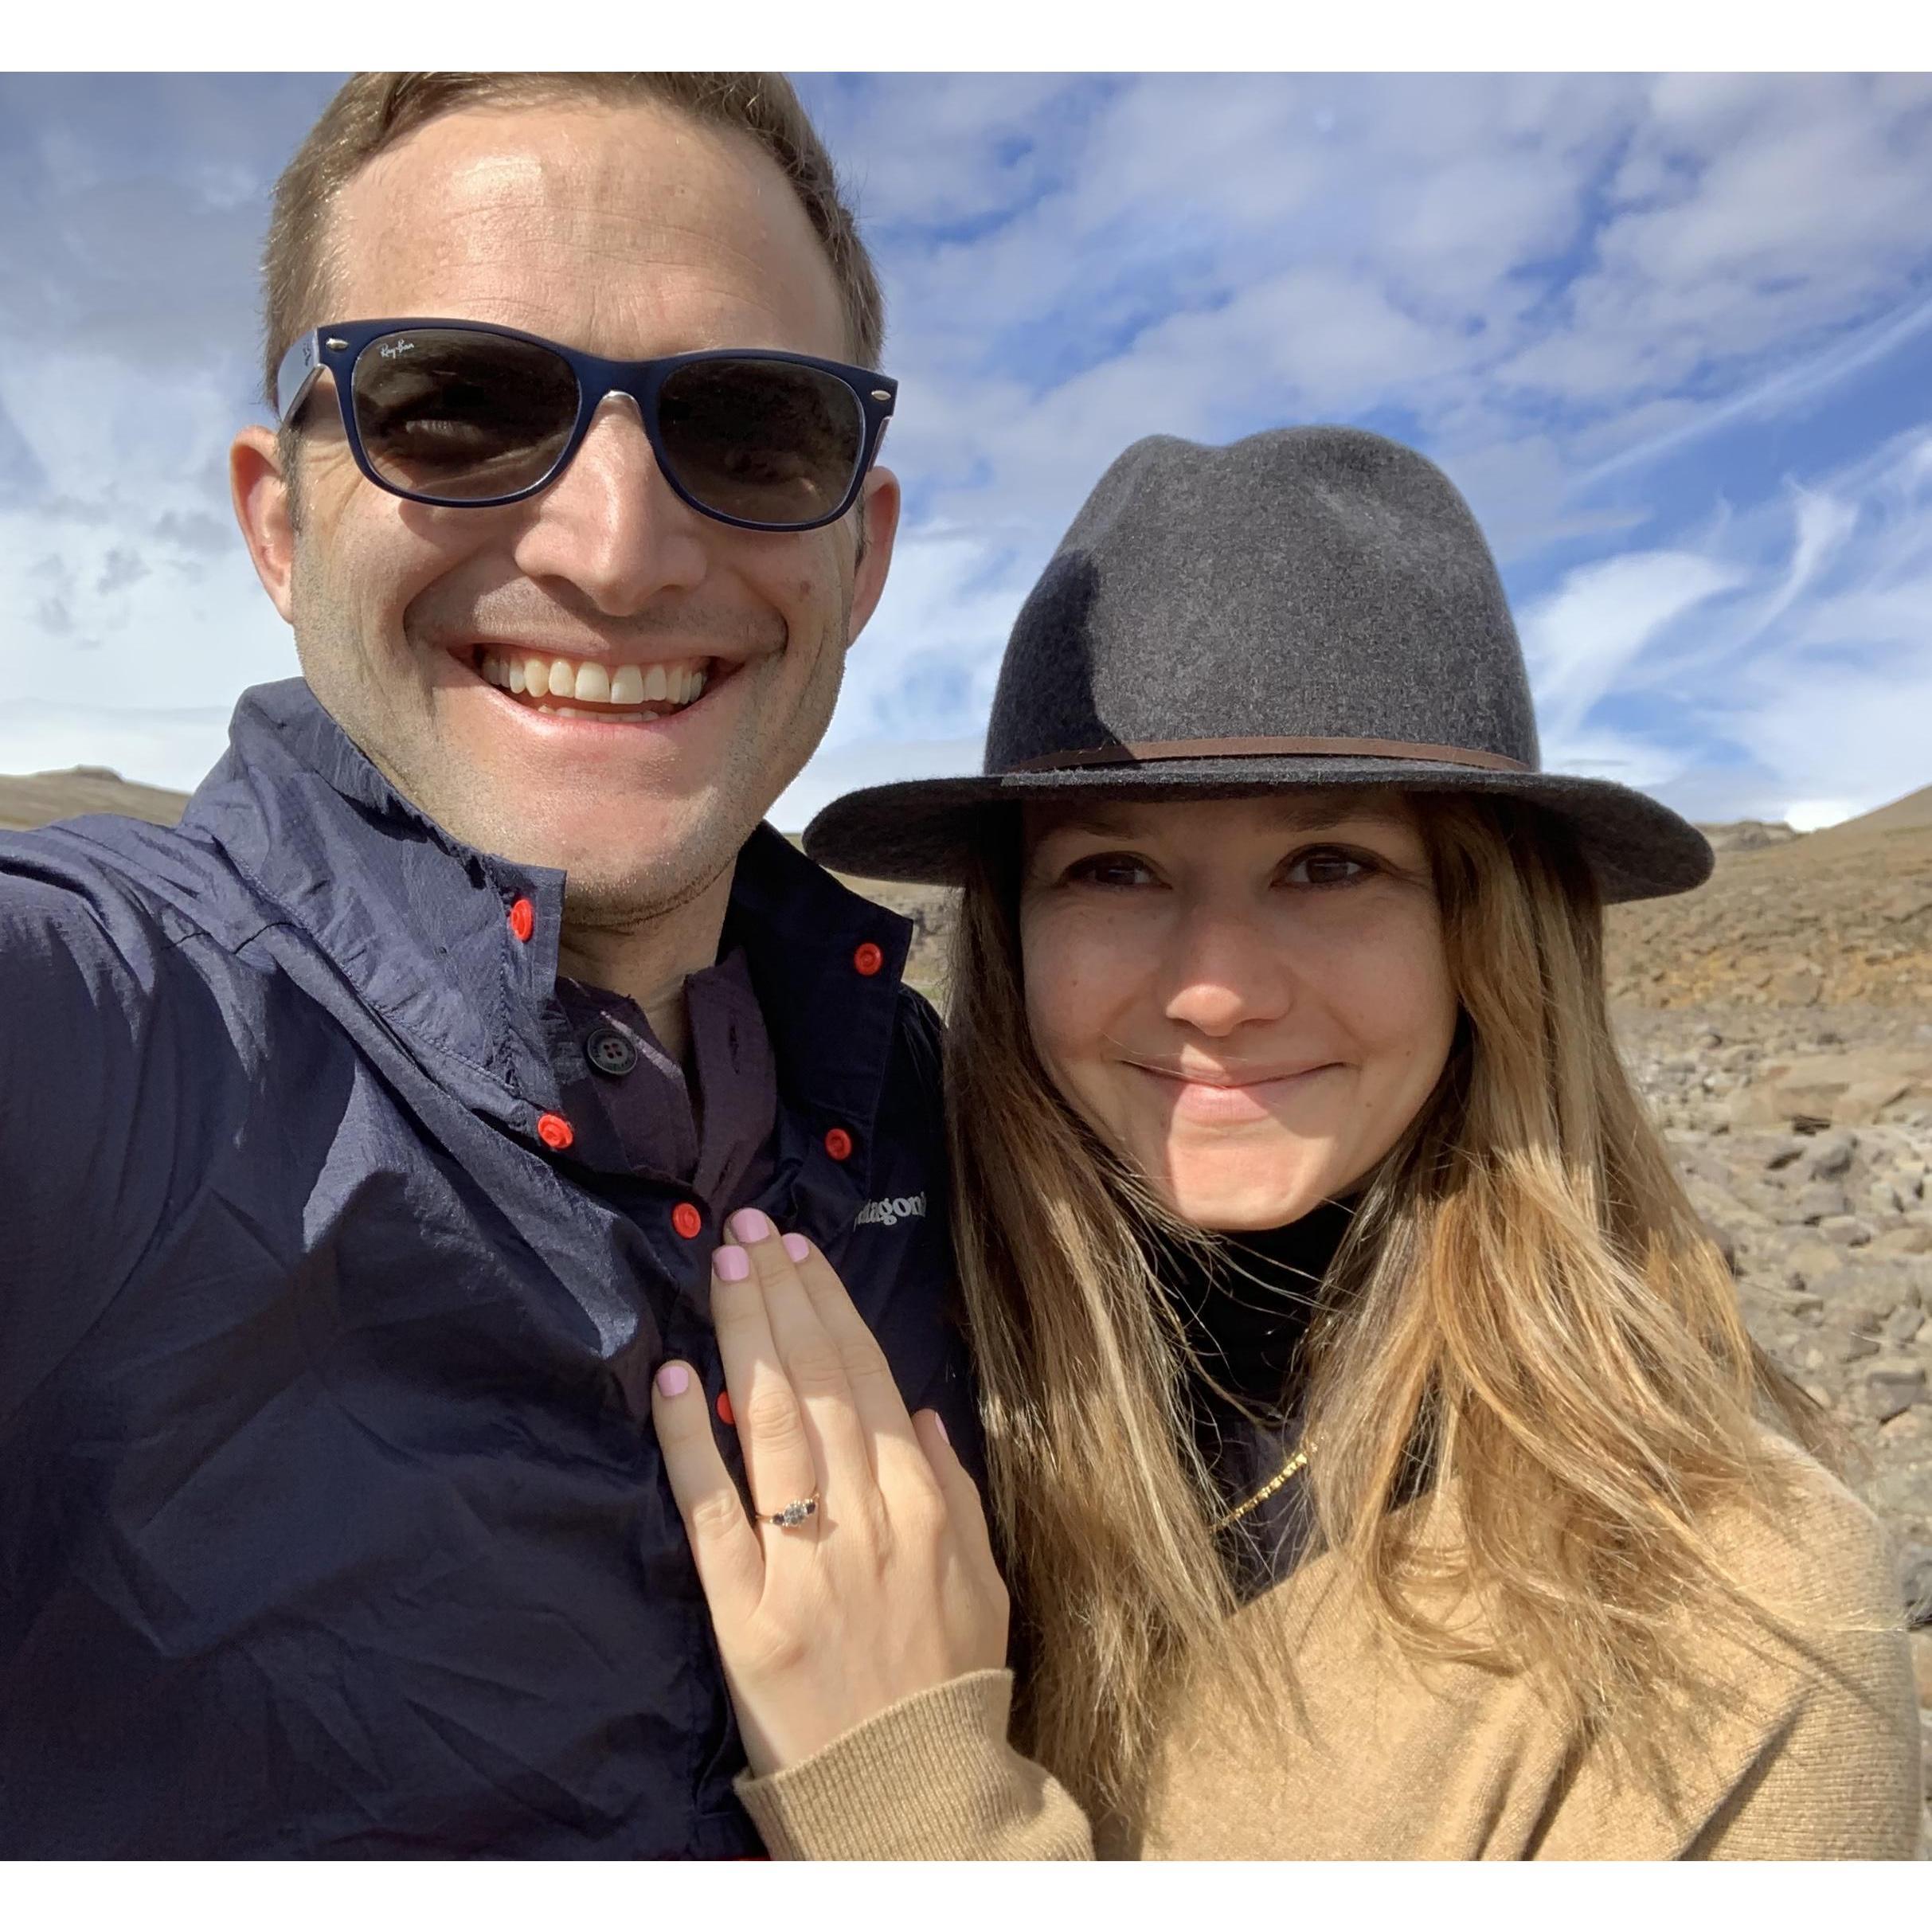 Right after we got engaged in a rock canyon in Iceland! 06/21/19